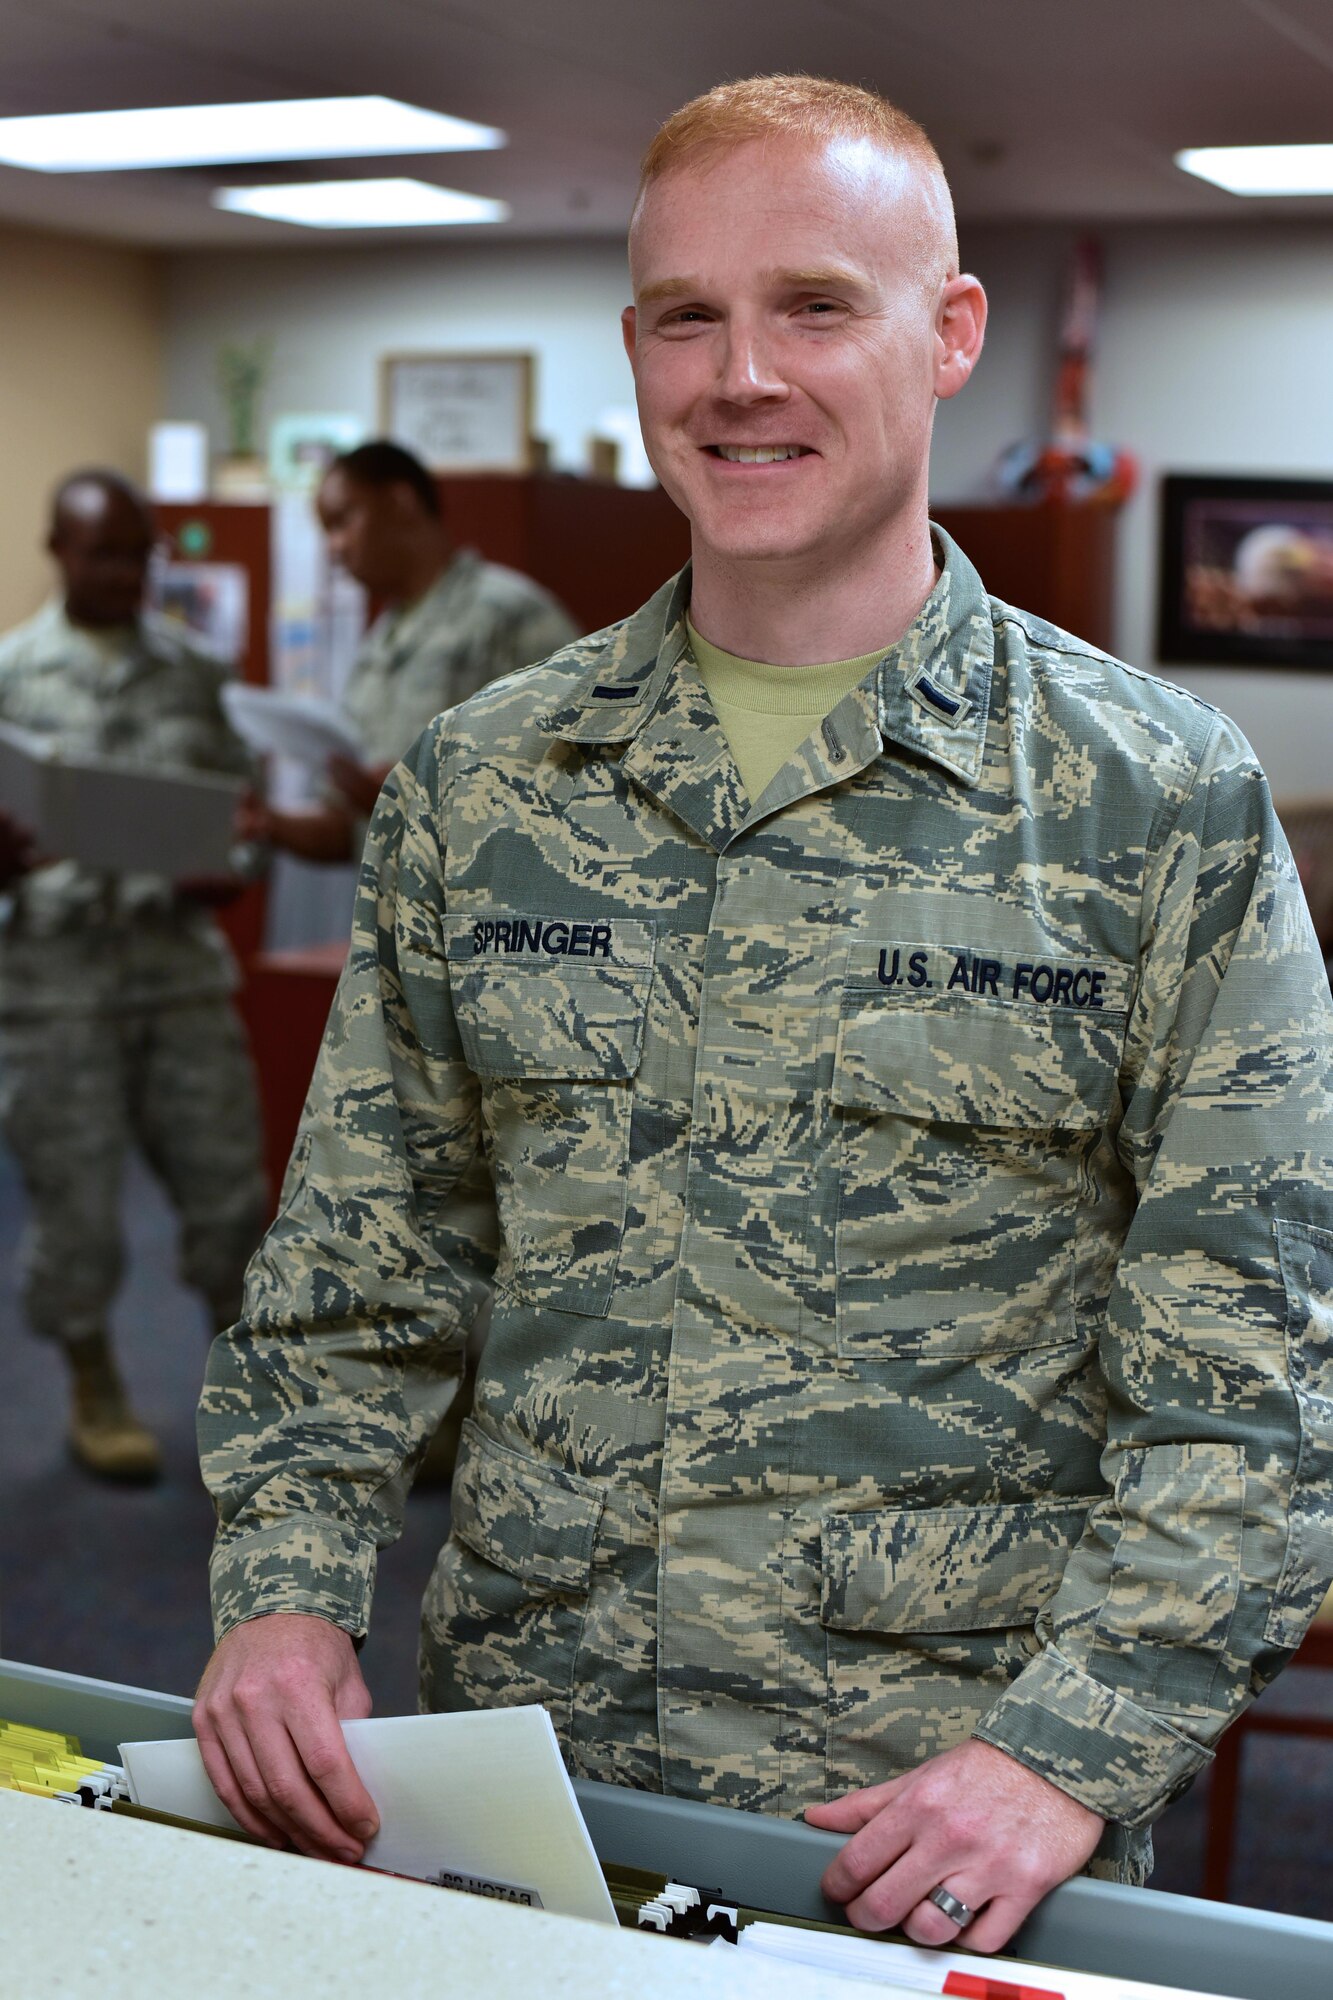 1LT James Springer was selected by 19th Medical Group as the Combat Airlifter of the week, July 28, 2017 on Little Rock Air Force Base, Ark.